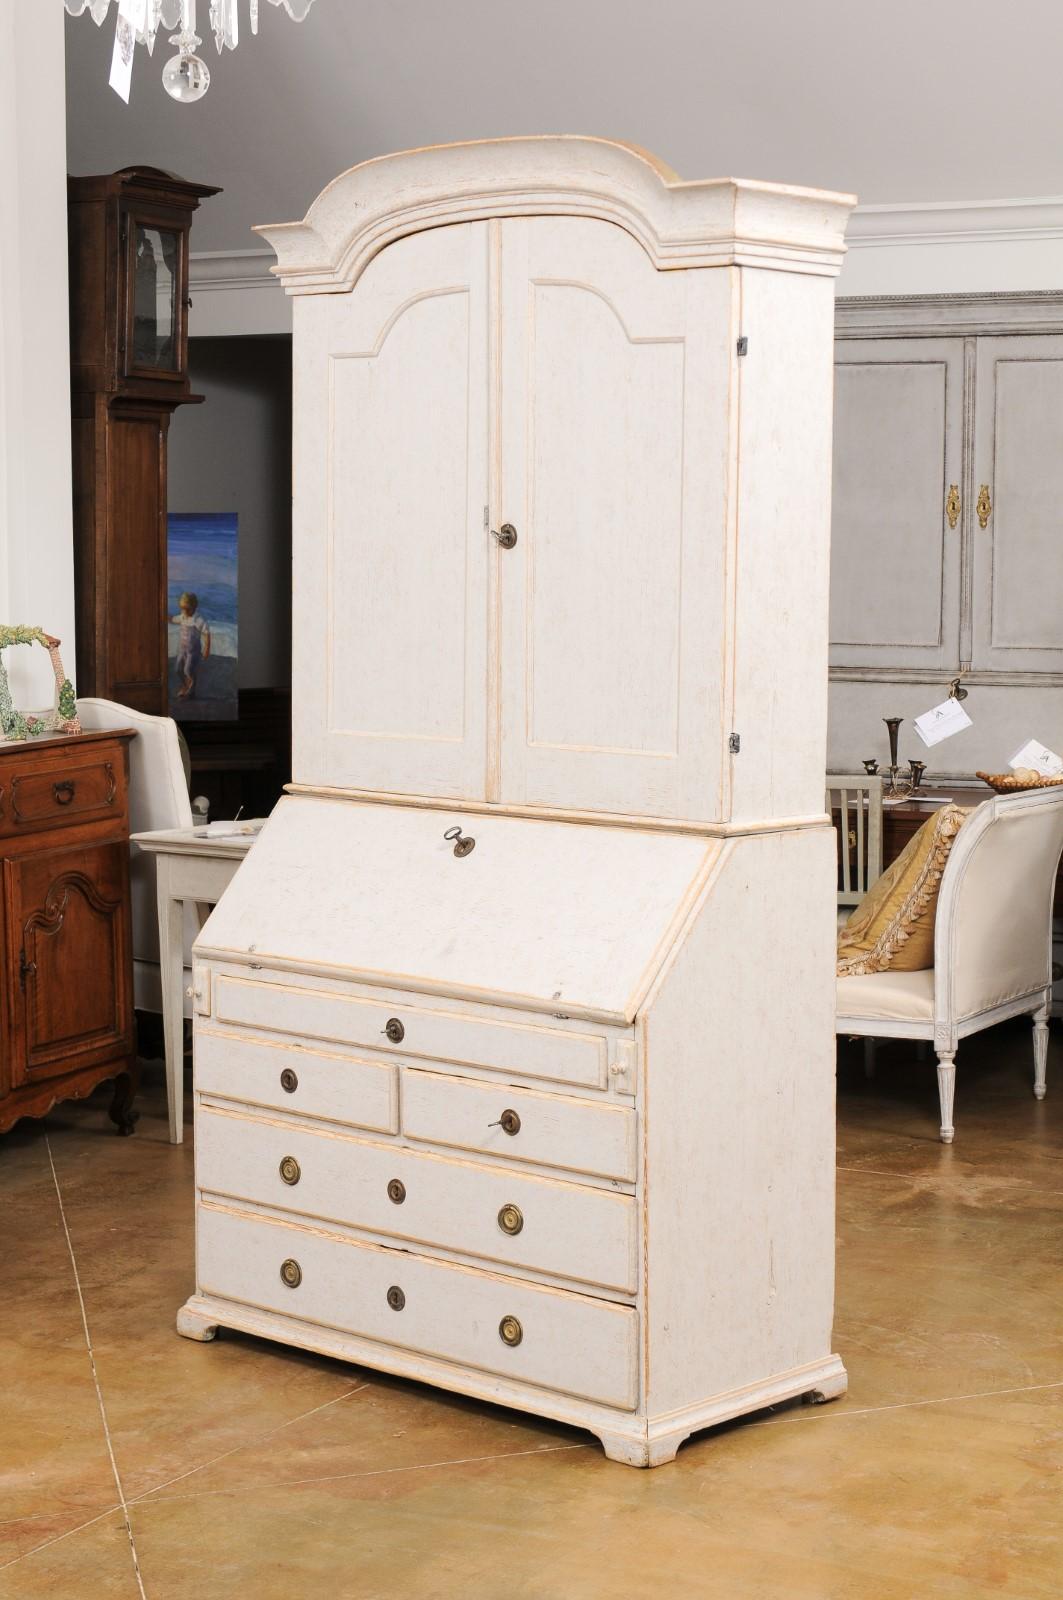 Swedish Rococo Period 1790s Painted Two-Part Secretary with Slanted Front Desk For Sale 6